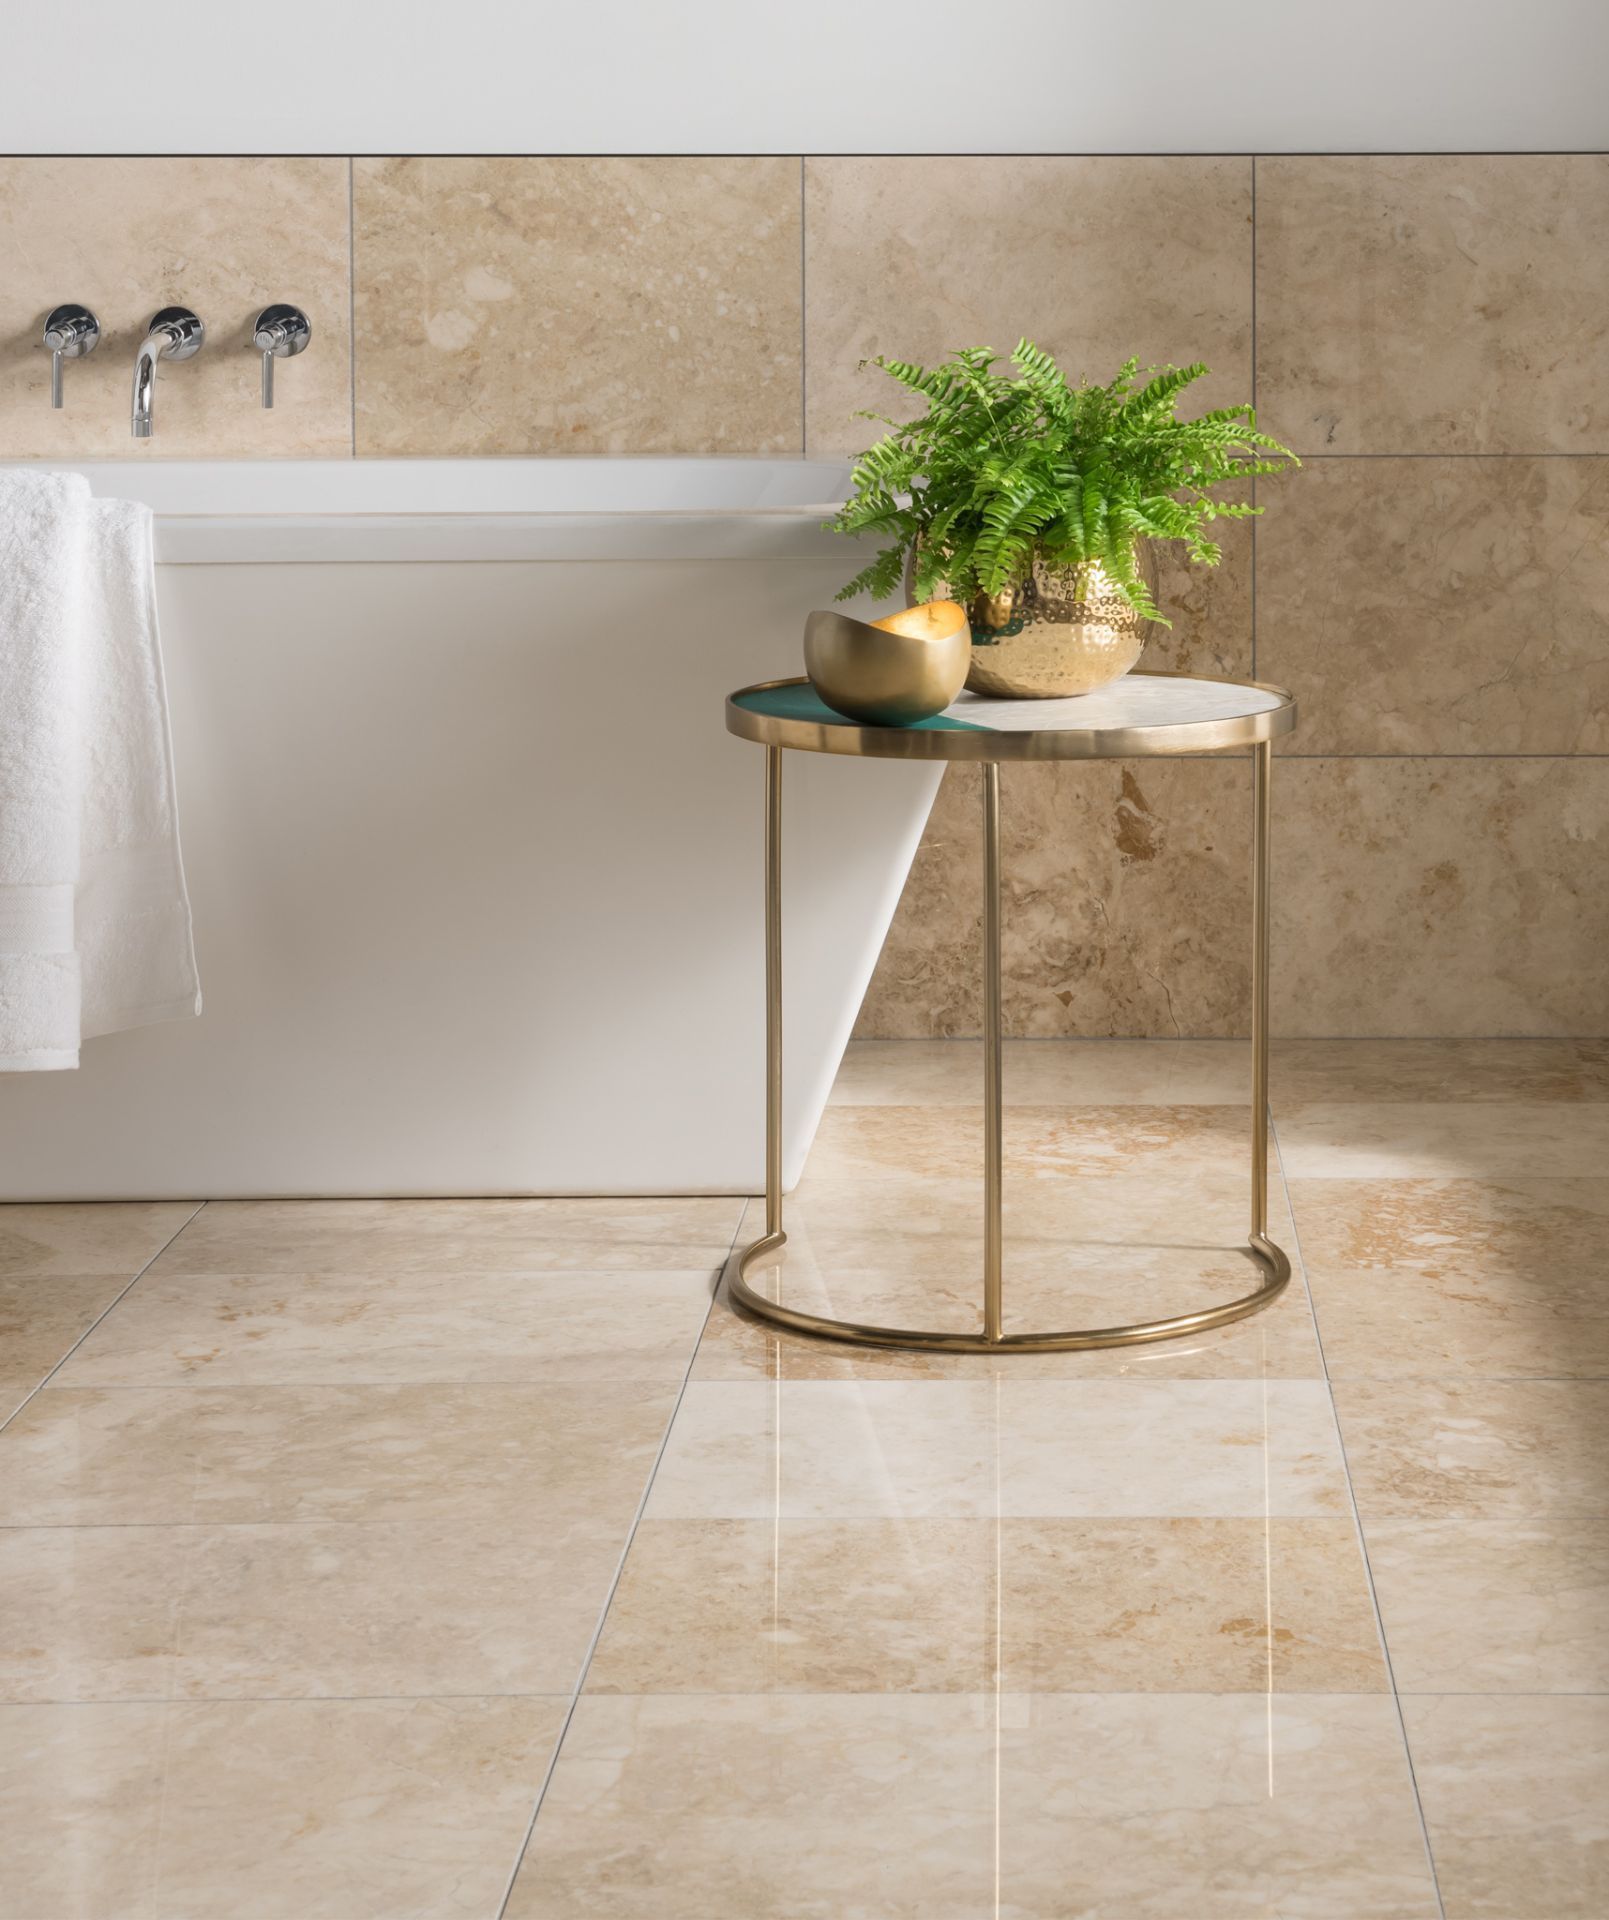 NEW 8.52m2 Hama Beige Wall and Floor Tiles. 450x450mm per tile, 10mm thick. Initially ceramic